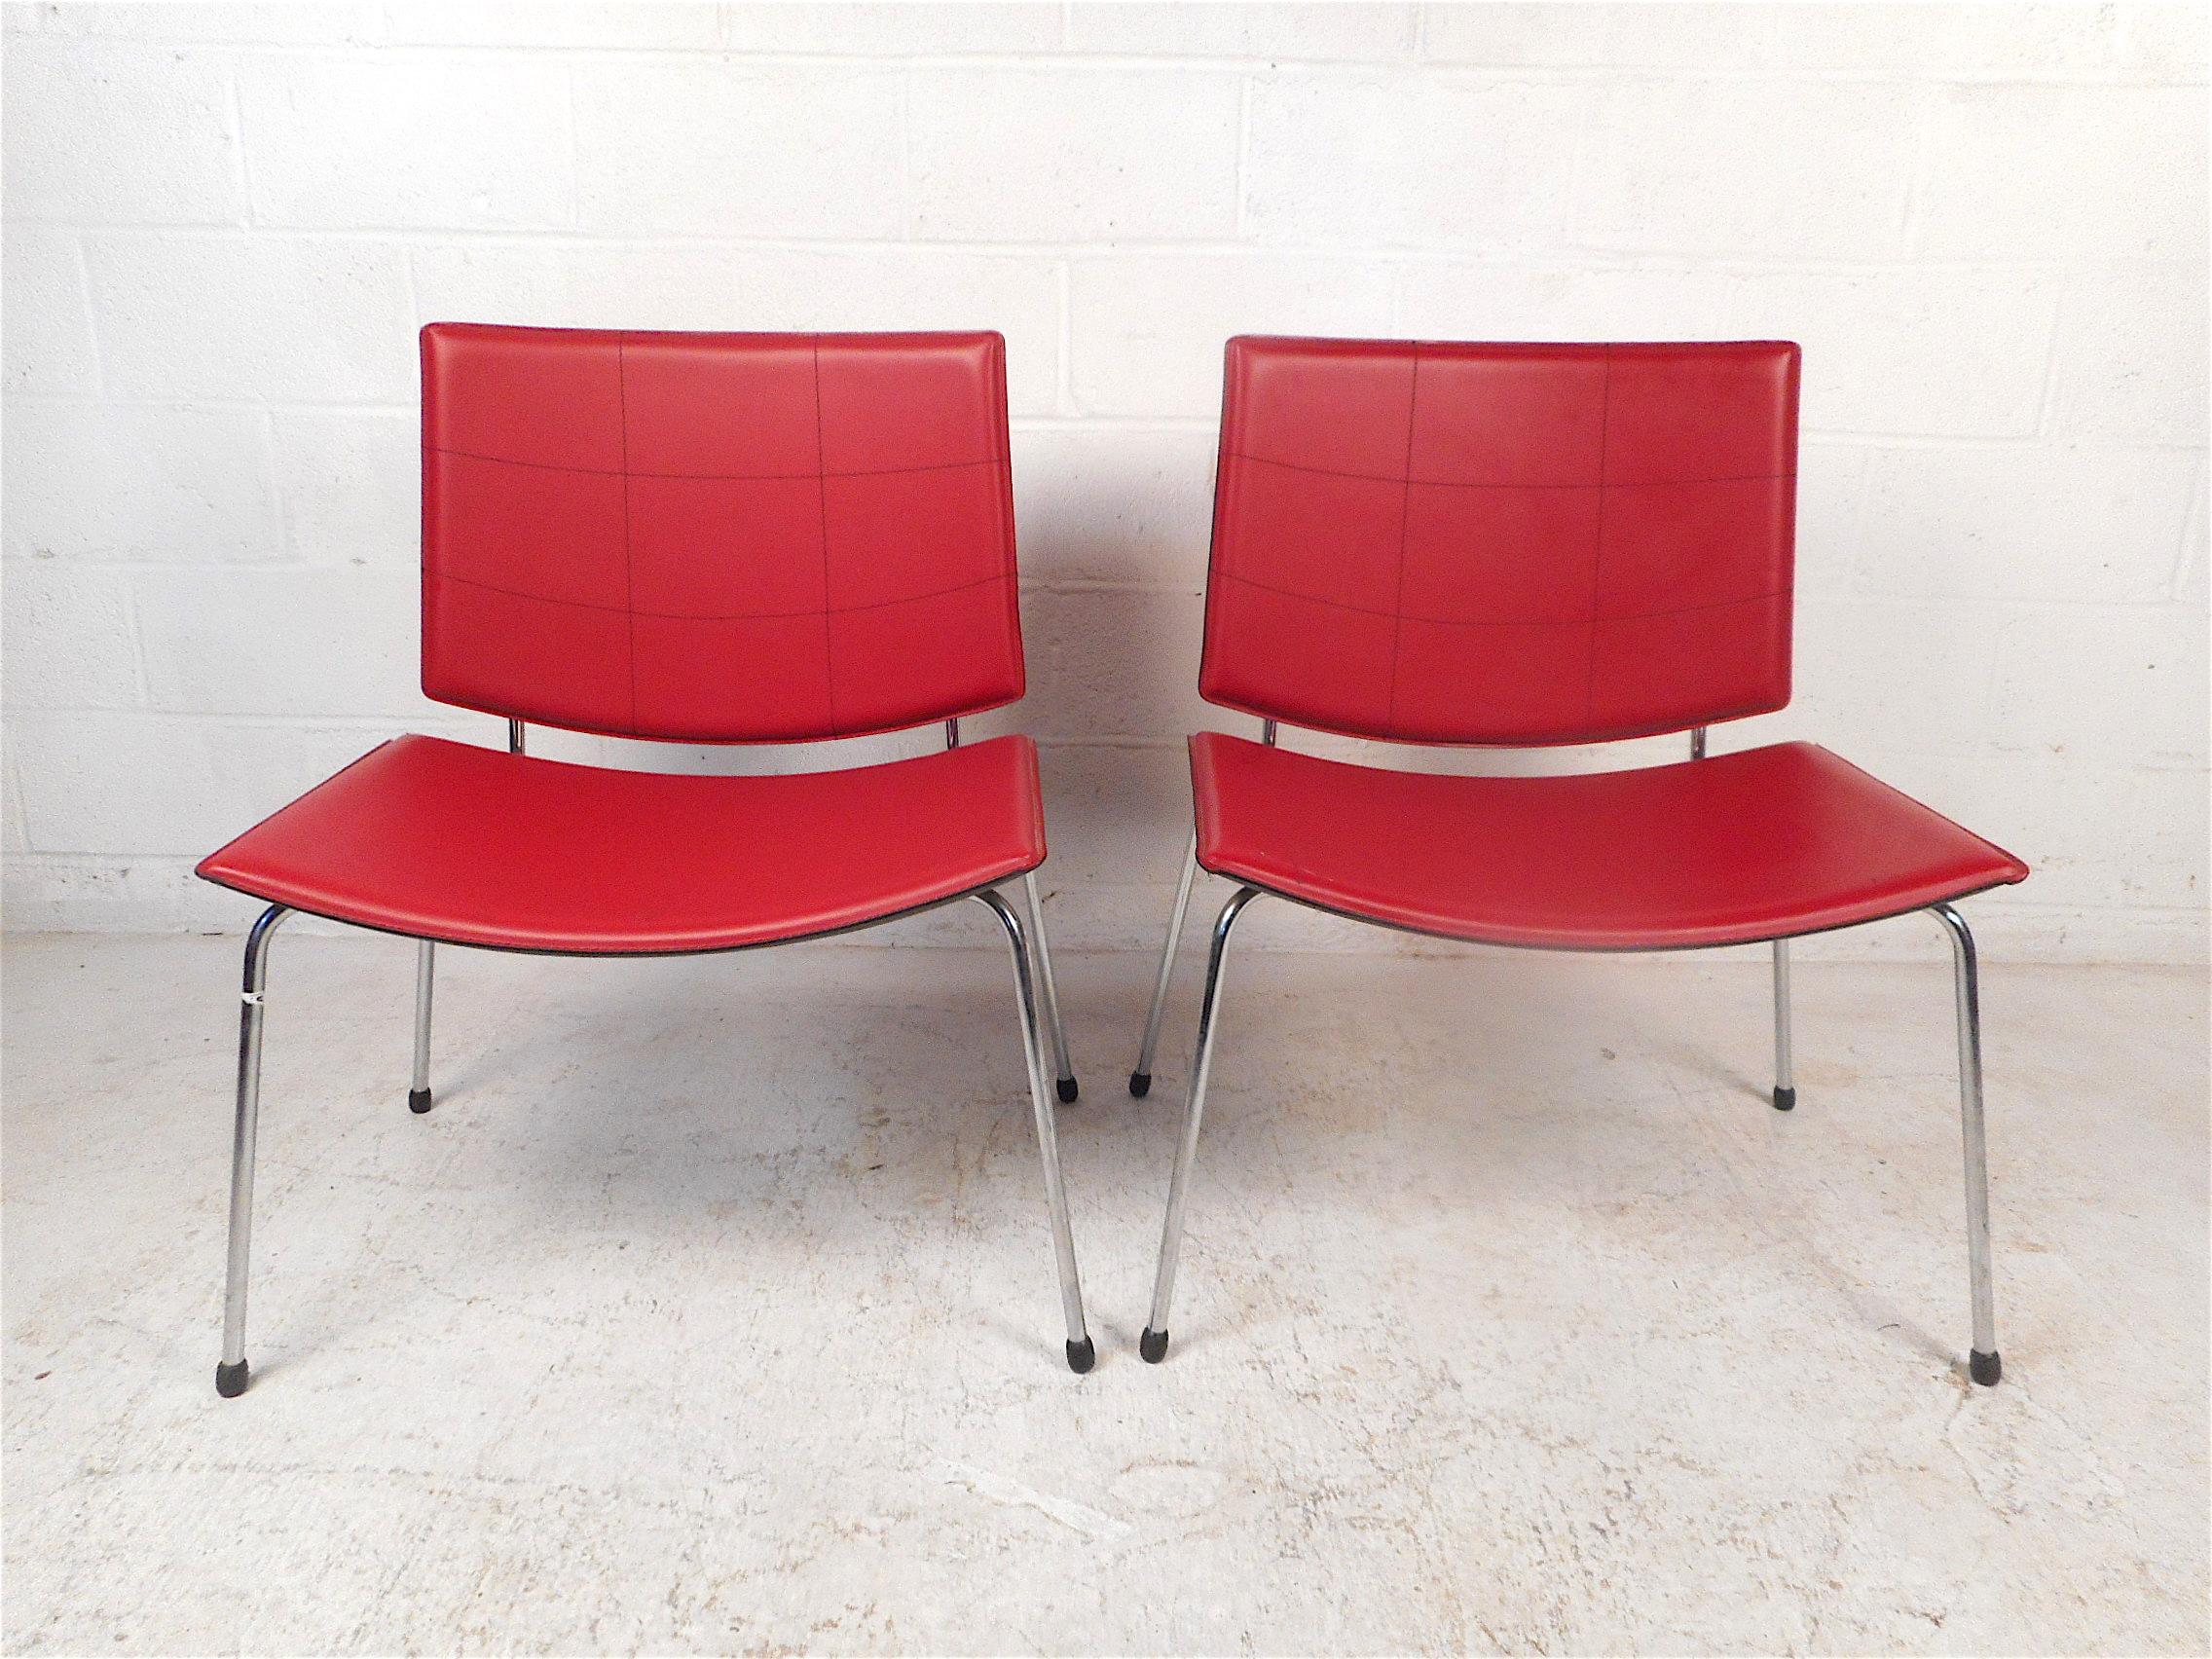 Stylish pair of modern chairs. Very spacious and comfortable seats and backrests. Covered in a red vinyl upholstery, supported by a sleek chrome frame. Made in Italy. This pair would make a great addition to any modern interior. Please confirm item